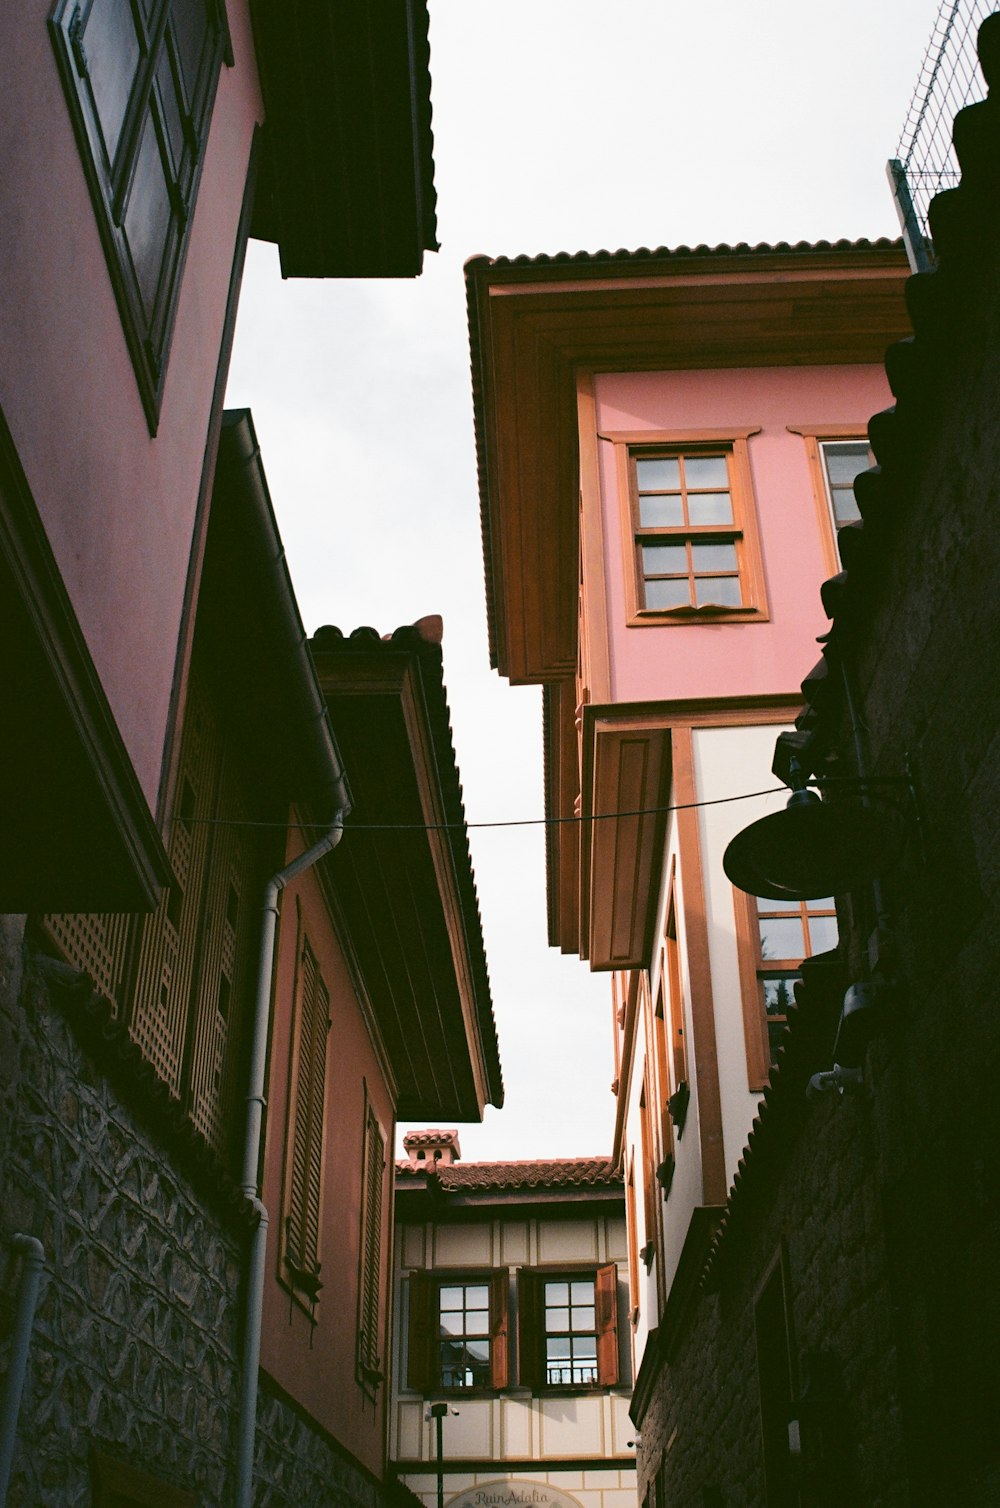 a narrow alleyway between two buildings with windows